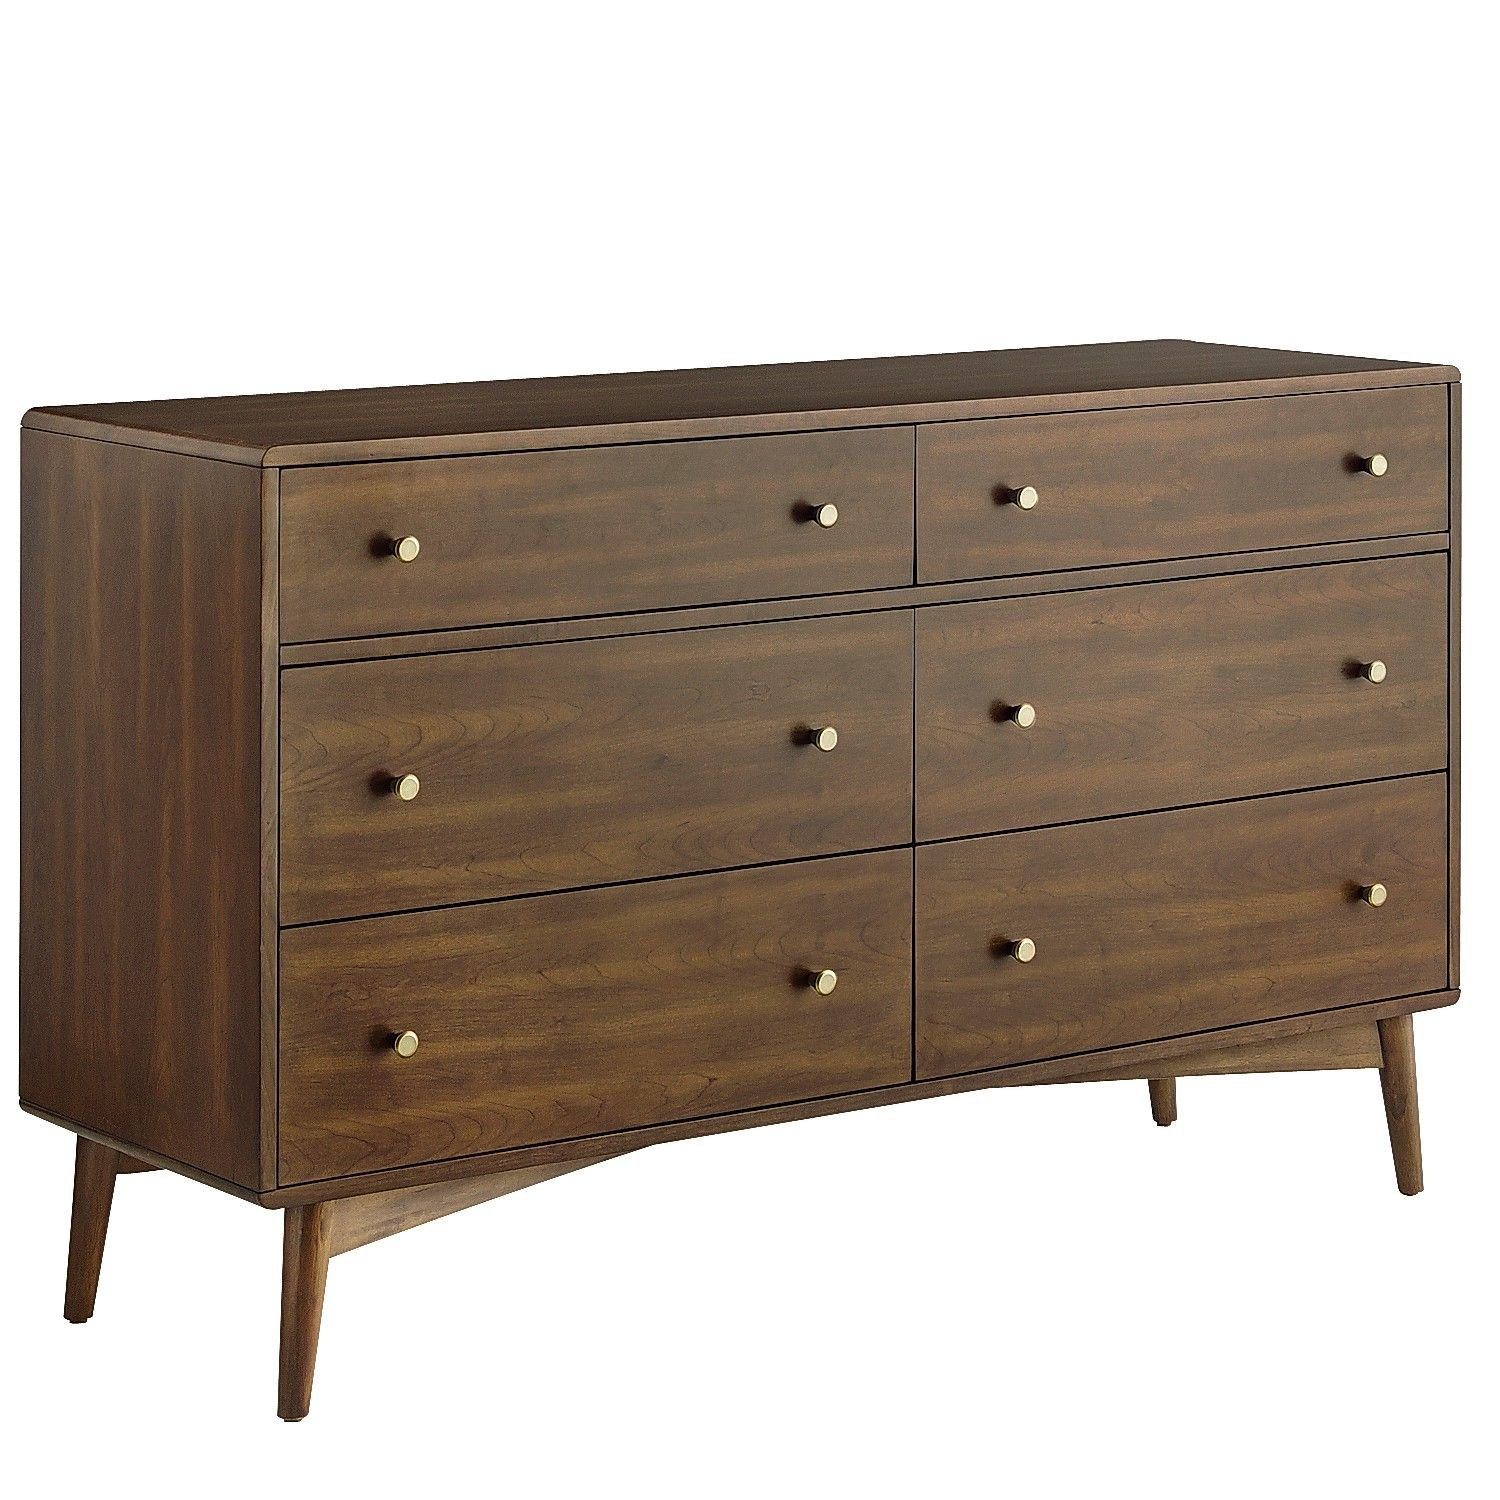 Bedroom Dressers and Chests New Marcel 6 Drawer Dresser Pecan Brown Wood